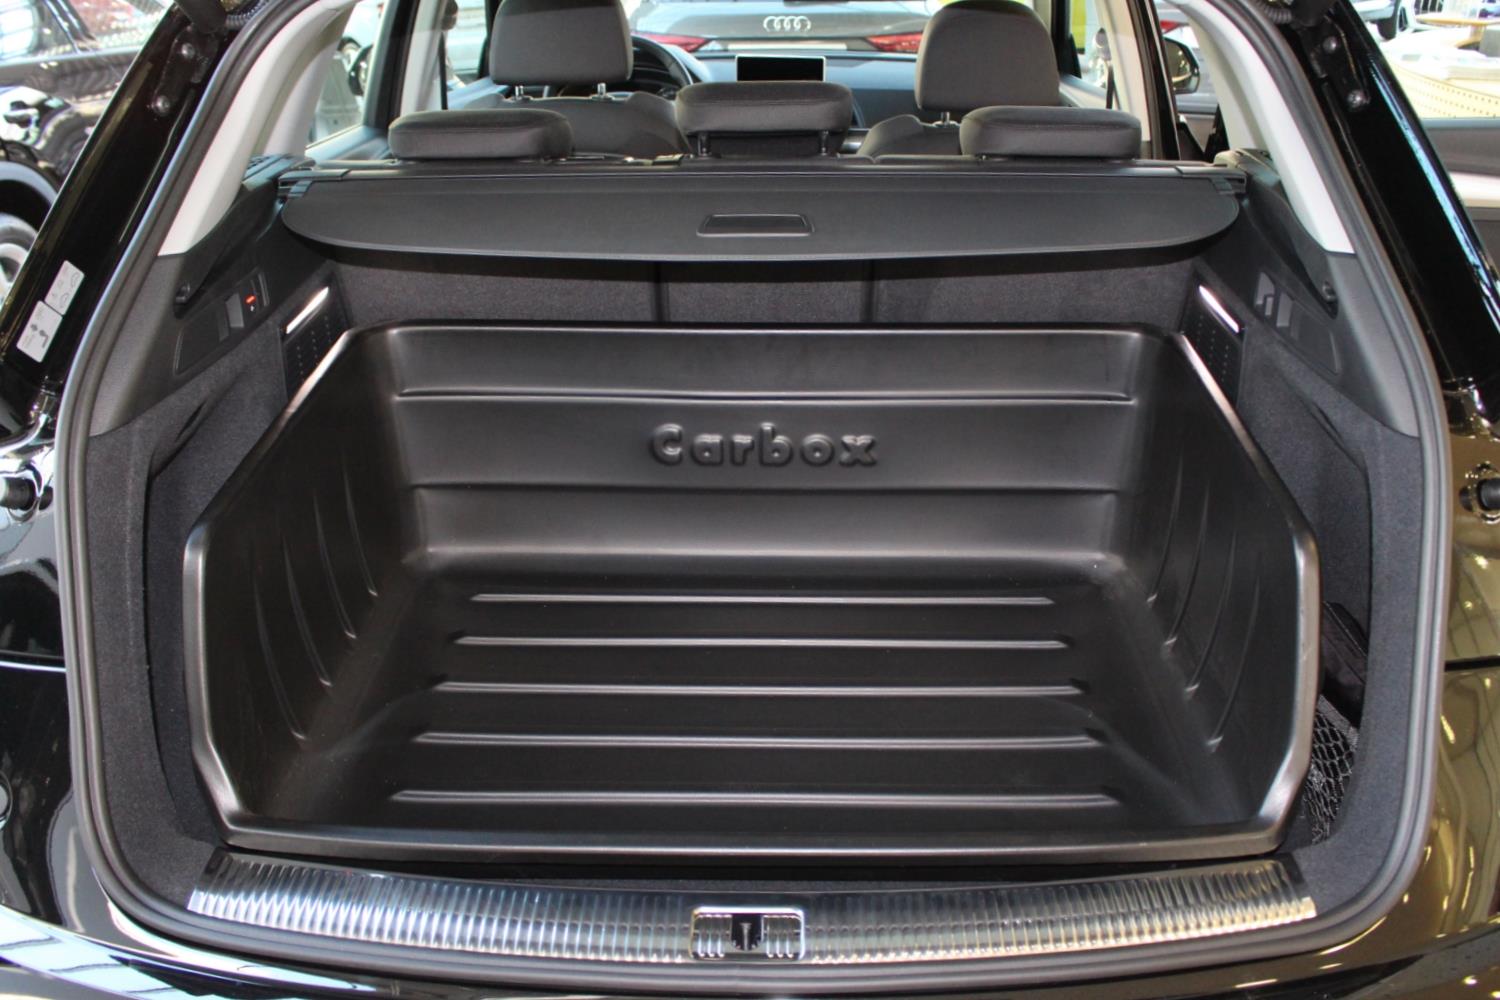 High sided boot liner – Carbox Classic